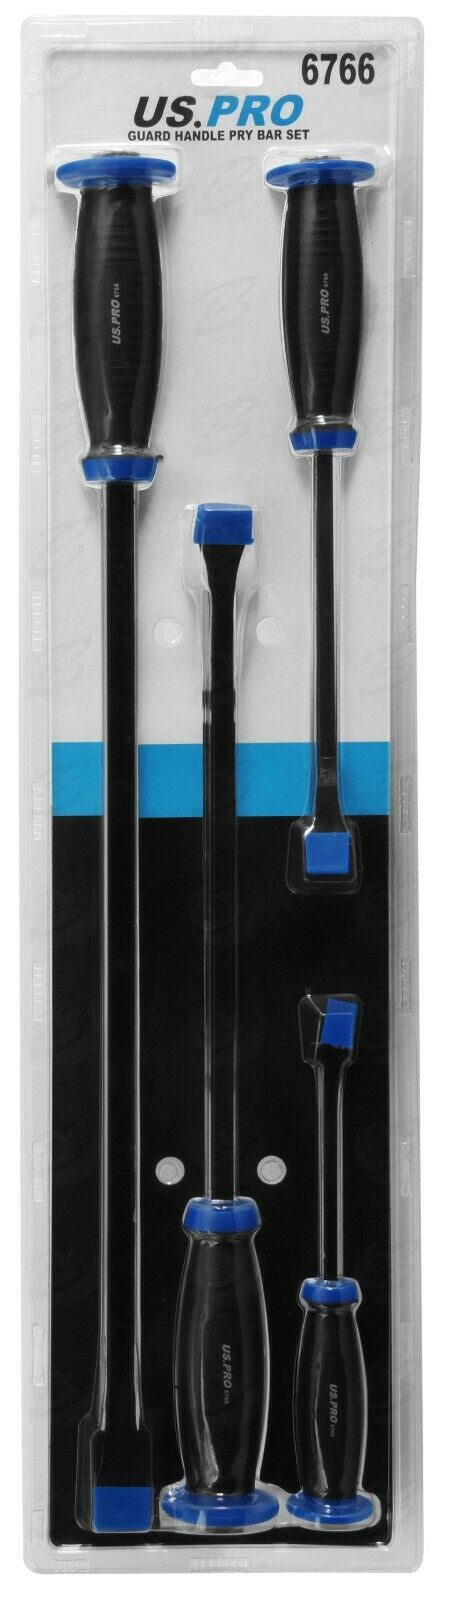 US PRO 4PCS PRY BAR SET WITH PROTECTIVE GUARDS